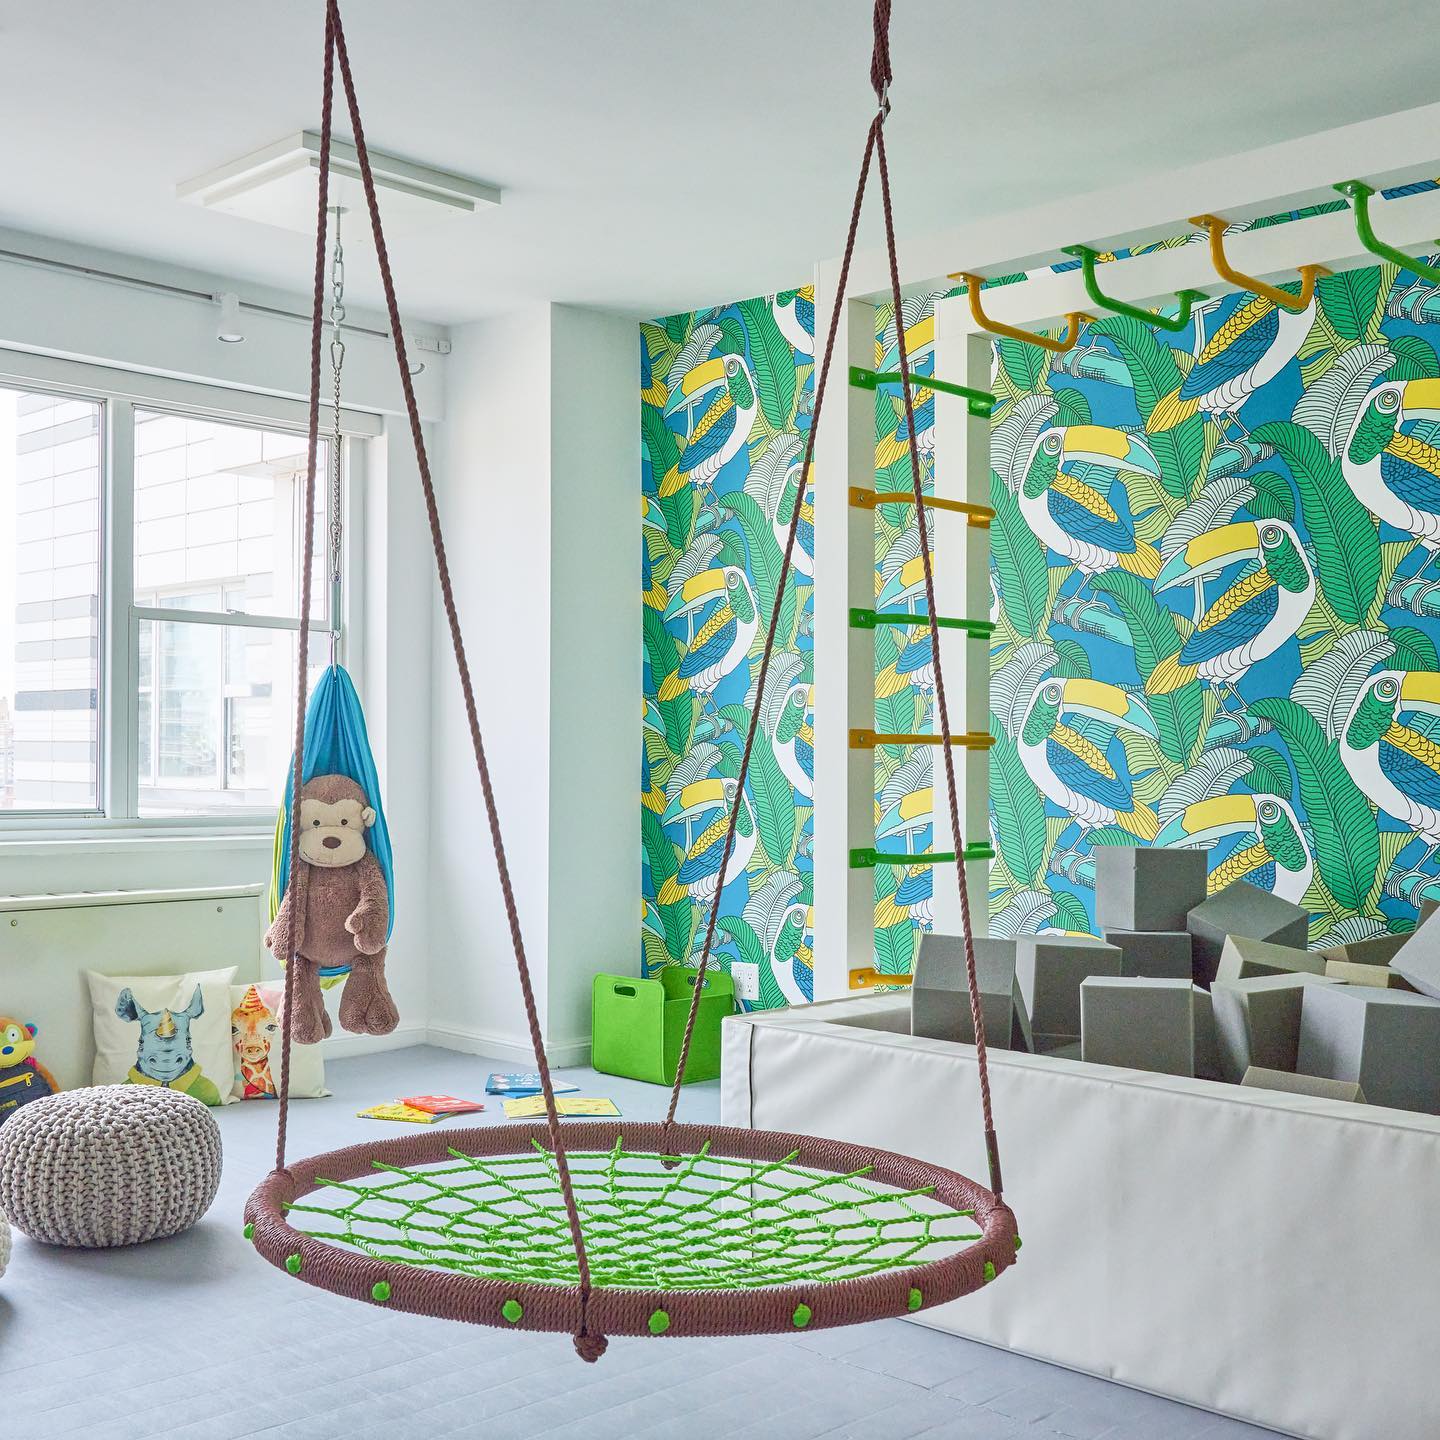 How to Design a Playful and Practical Playroom for Kids